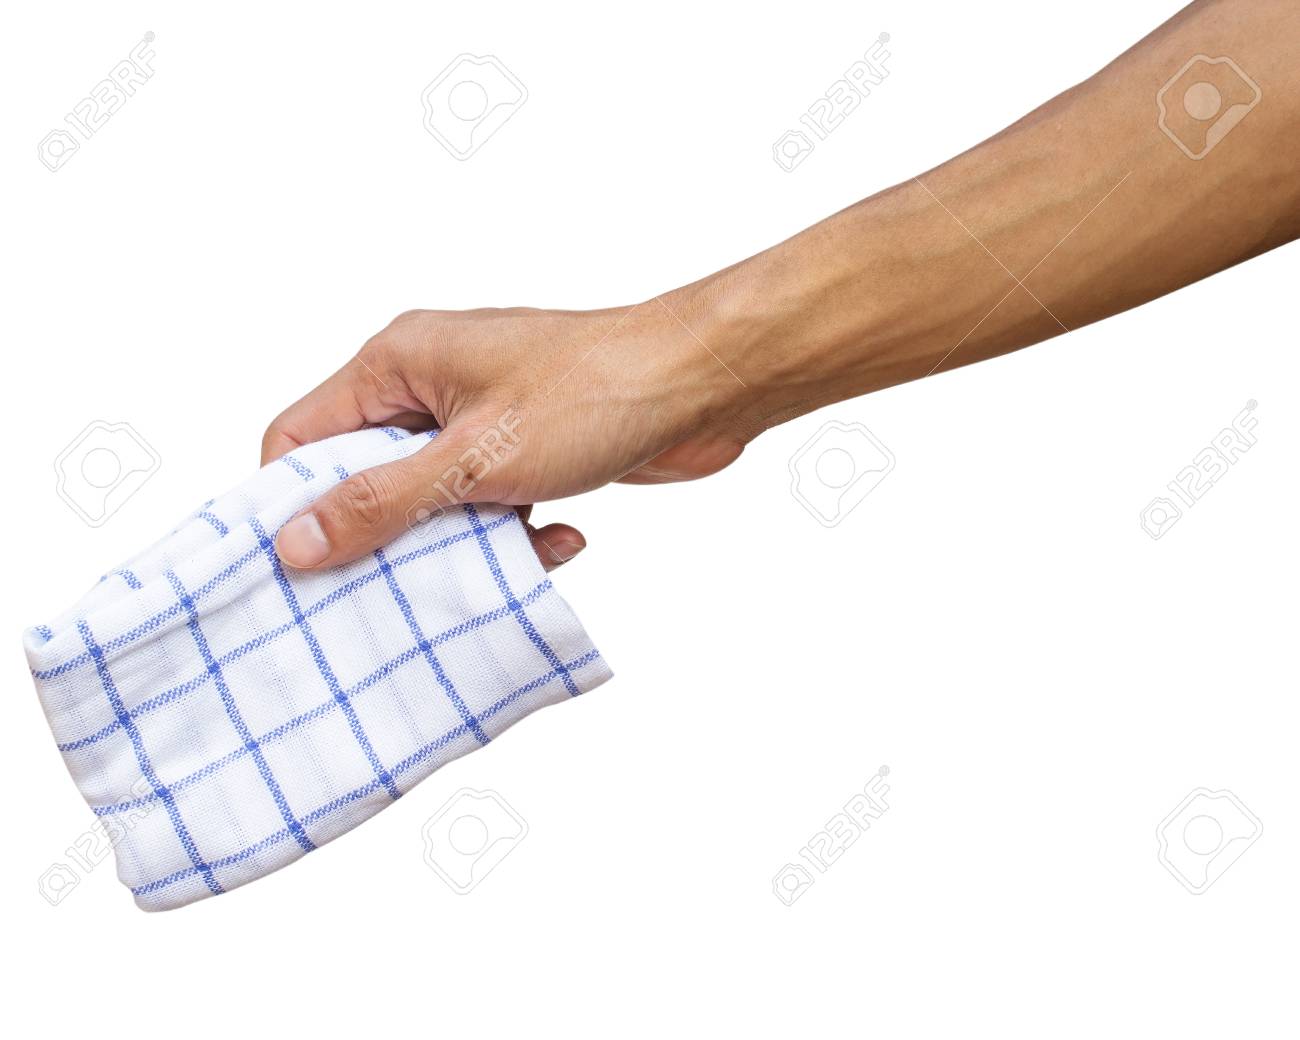 Man Hand Holding Handkerchief Or Table Wipes Isolated On White